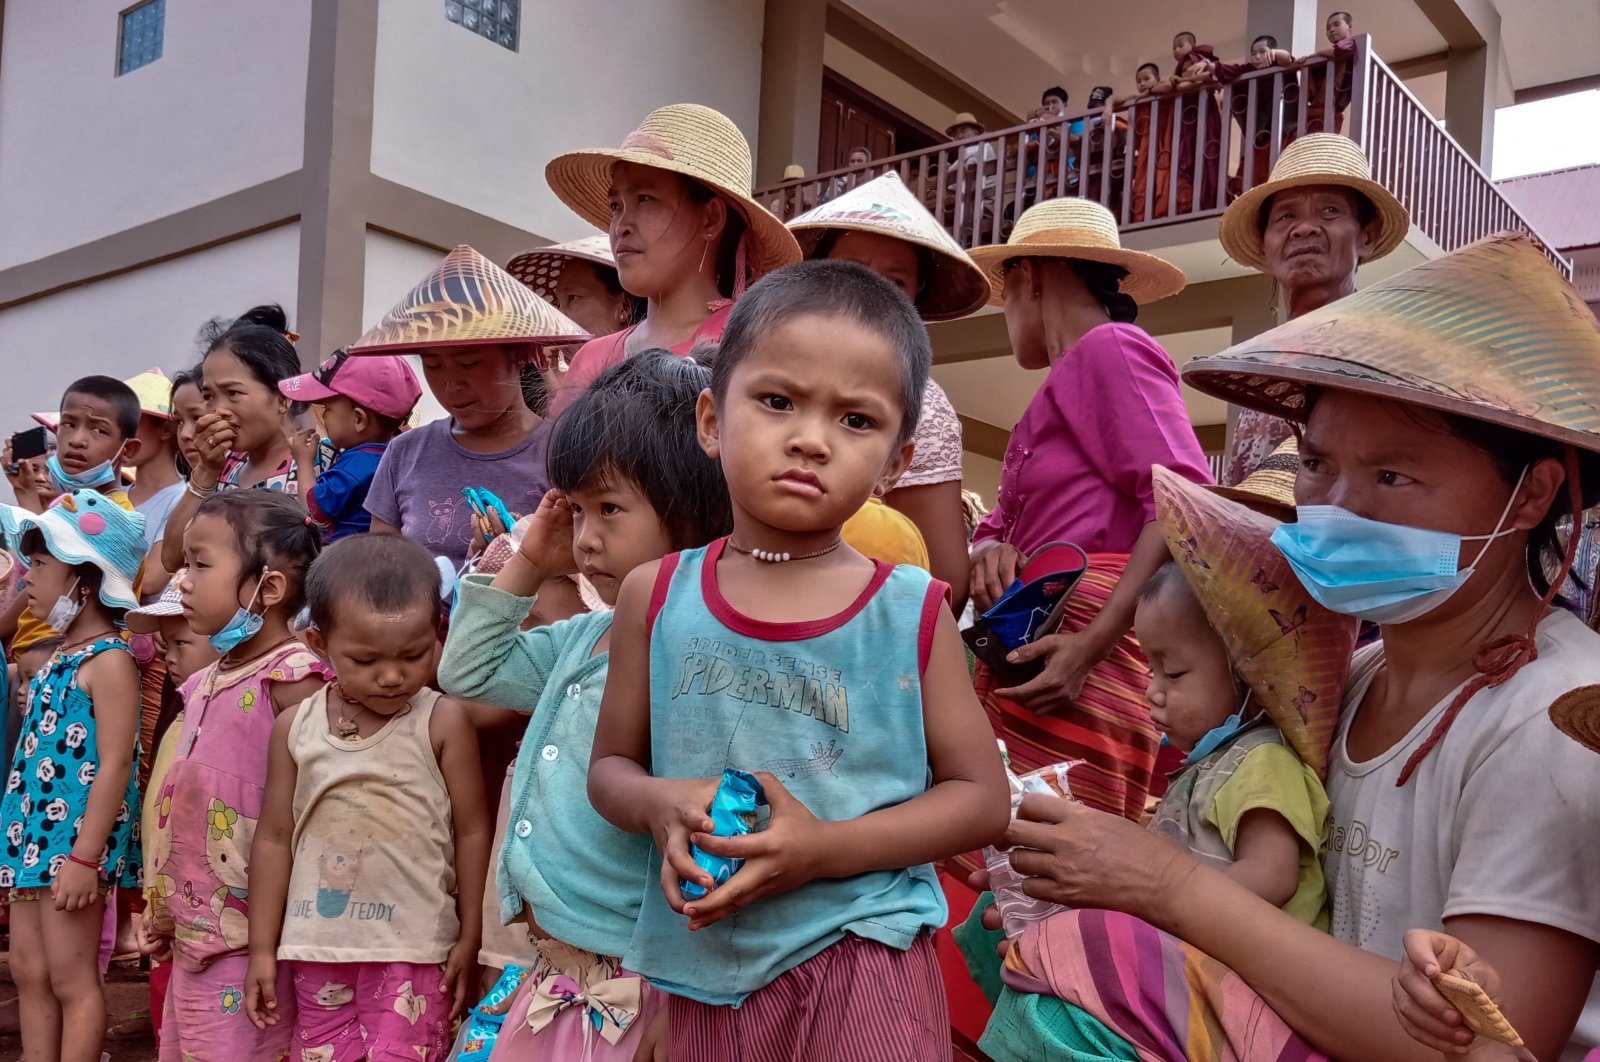 Children and elders displaced from recent fighting between government troops and ethnic rebels in their area, wait for food distribution from a volunteer group while taking refuge at a monastery in Namlan town, in Myanmar's eastern Shan state, May 25, 2021. (AFP Photo)